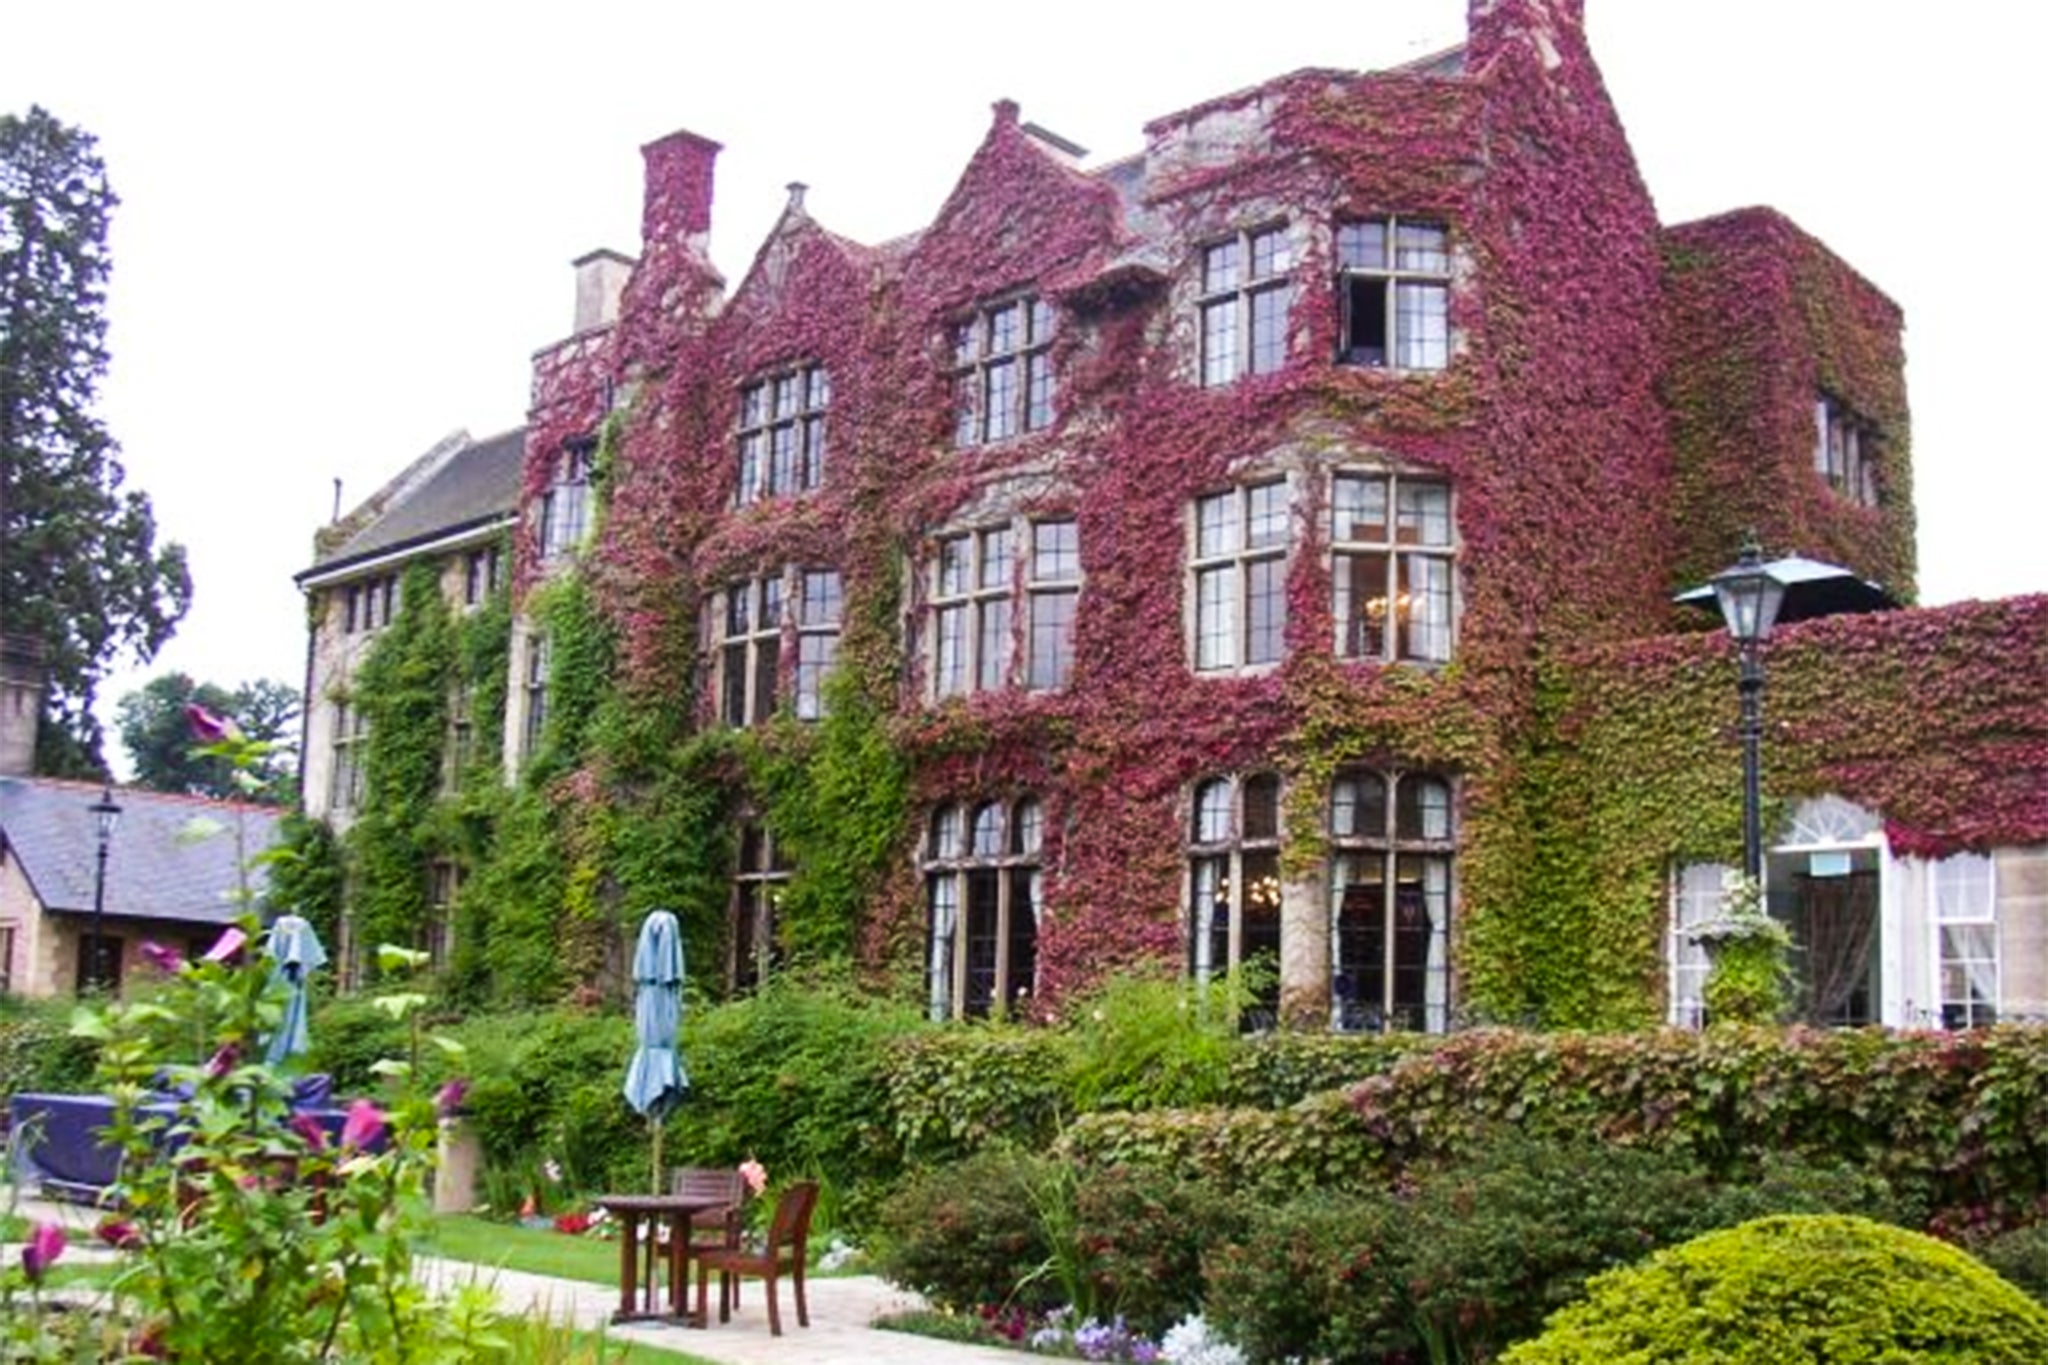 Her body was discovered at the luxury Pennyhill Park Hotel